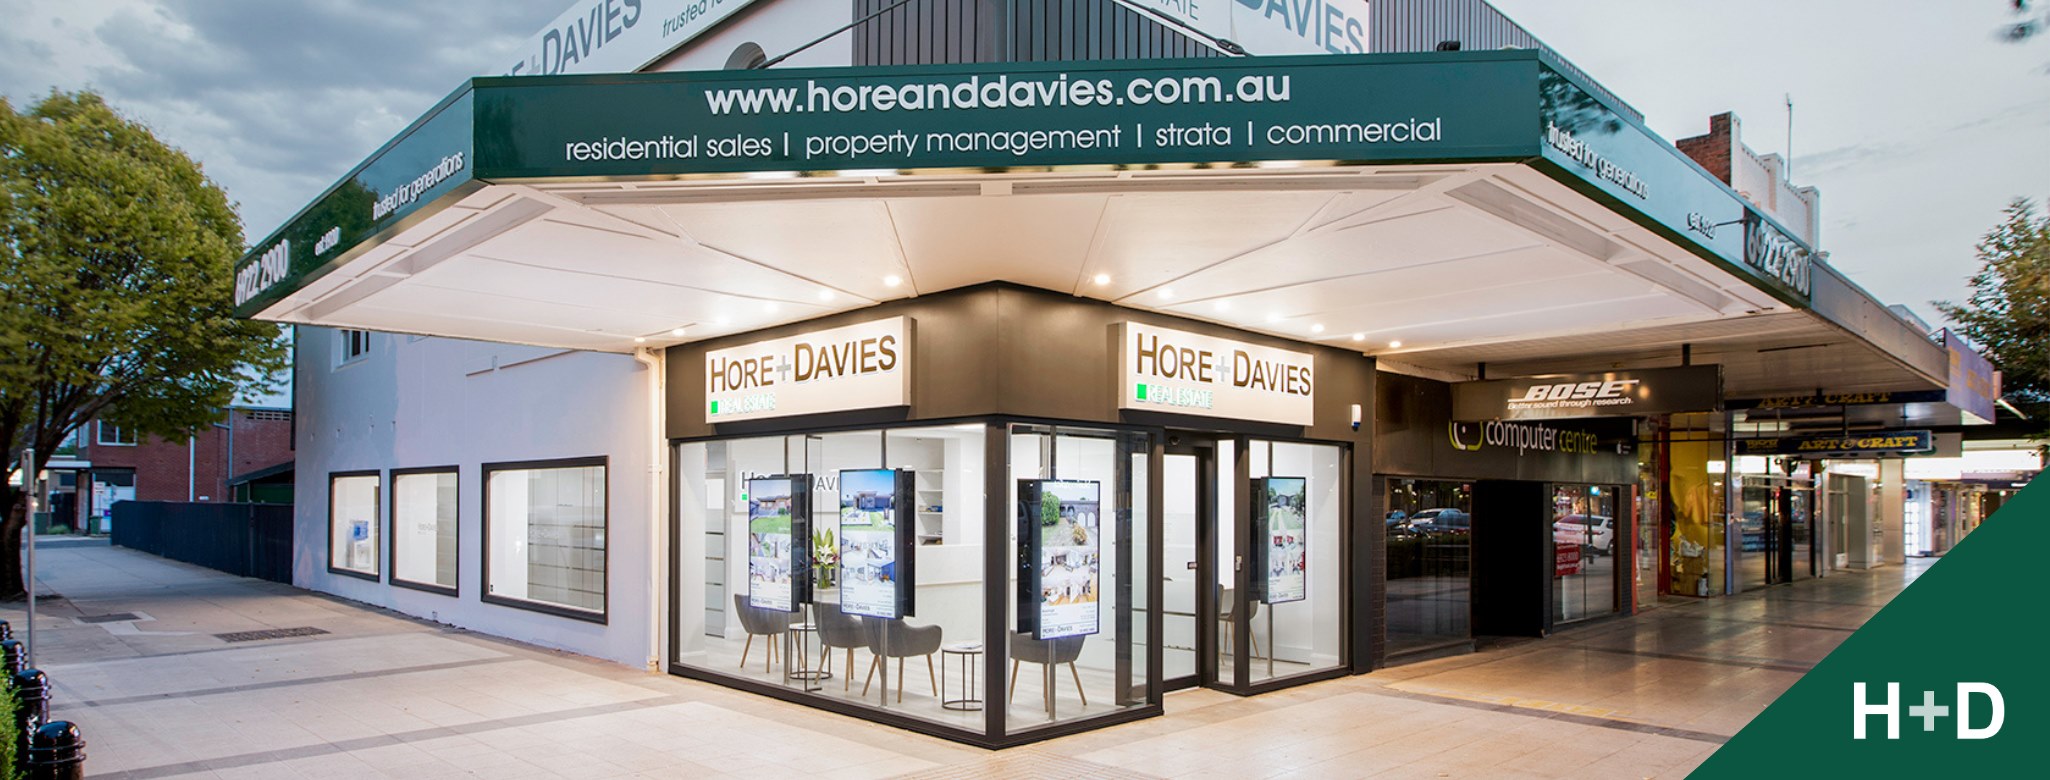 Hore and Davies Real Estate